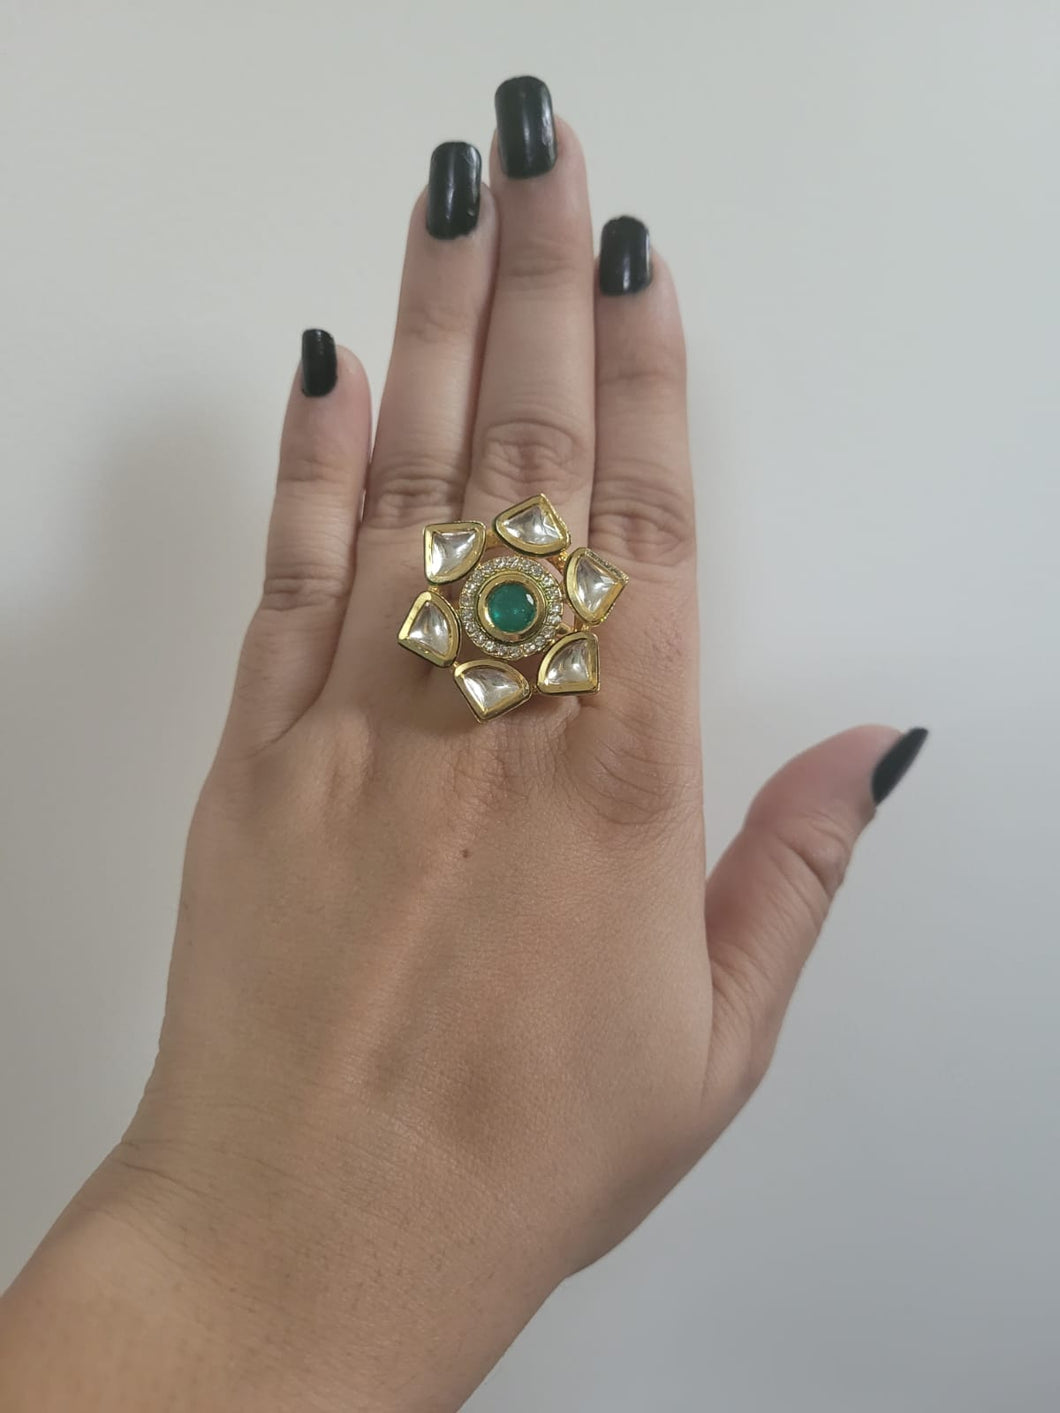 Be a vision with Nitram Diamond Jewellery! Cocktail rings that mesmerise  them with it's shine and setting! The ring inspired by the skies… |  Instagram